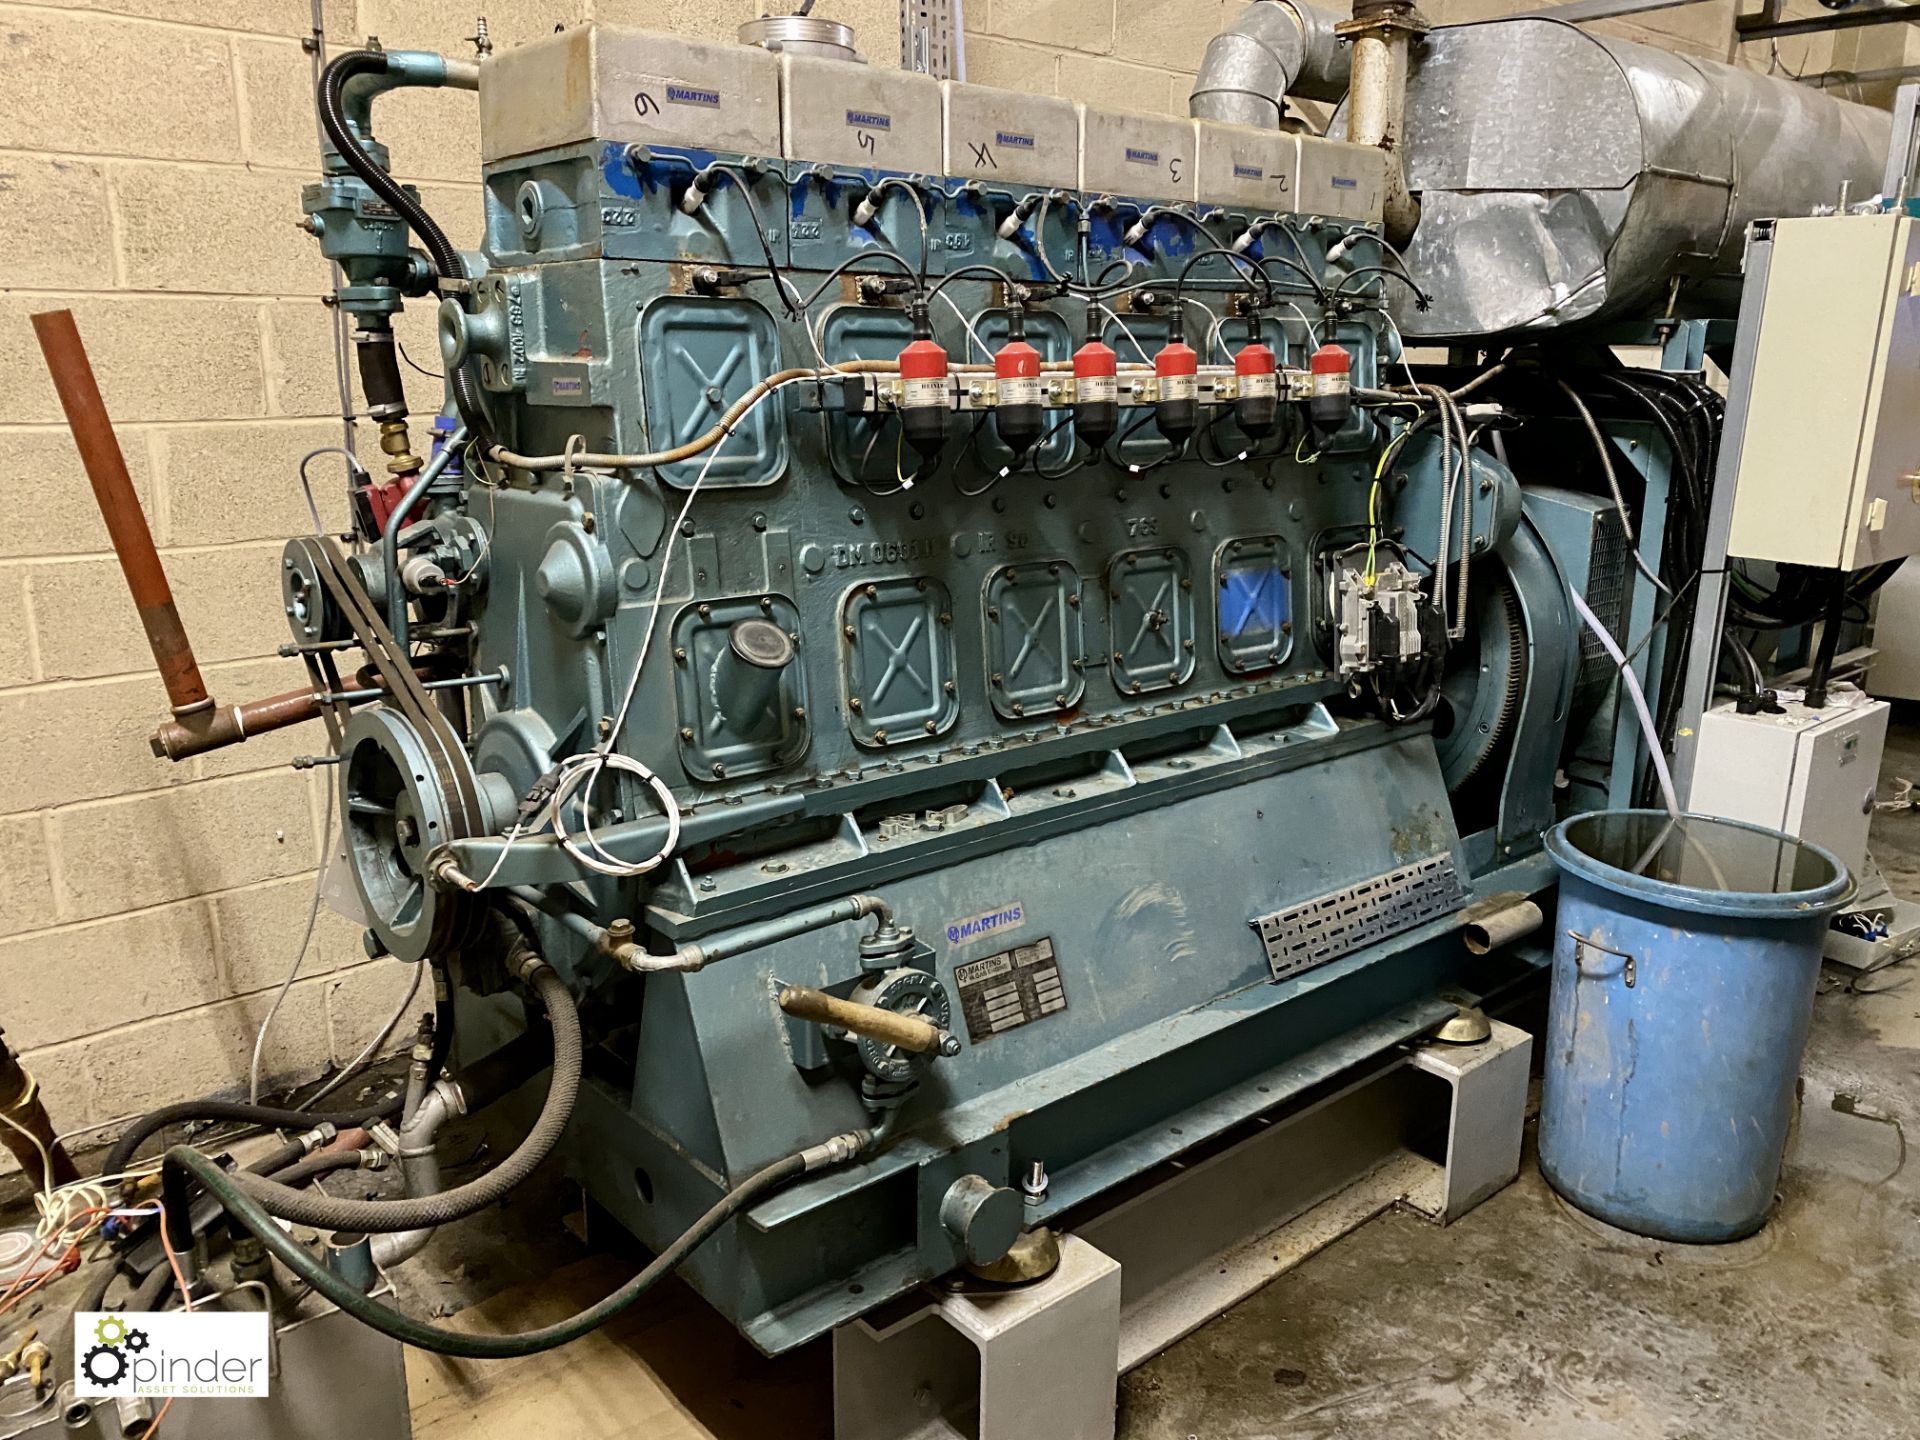 Martins M.C.6V250.TM wood gas fired Generator, serial number 250.017, year 2010, designed to run